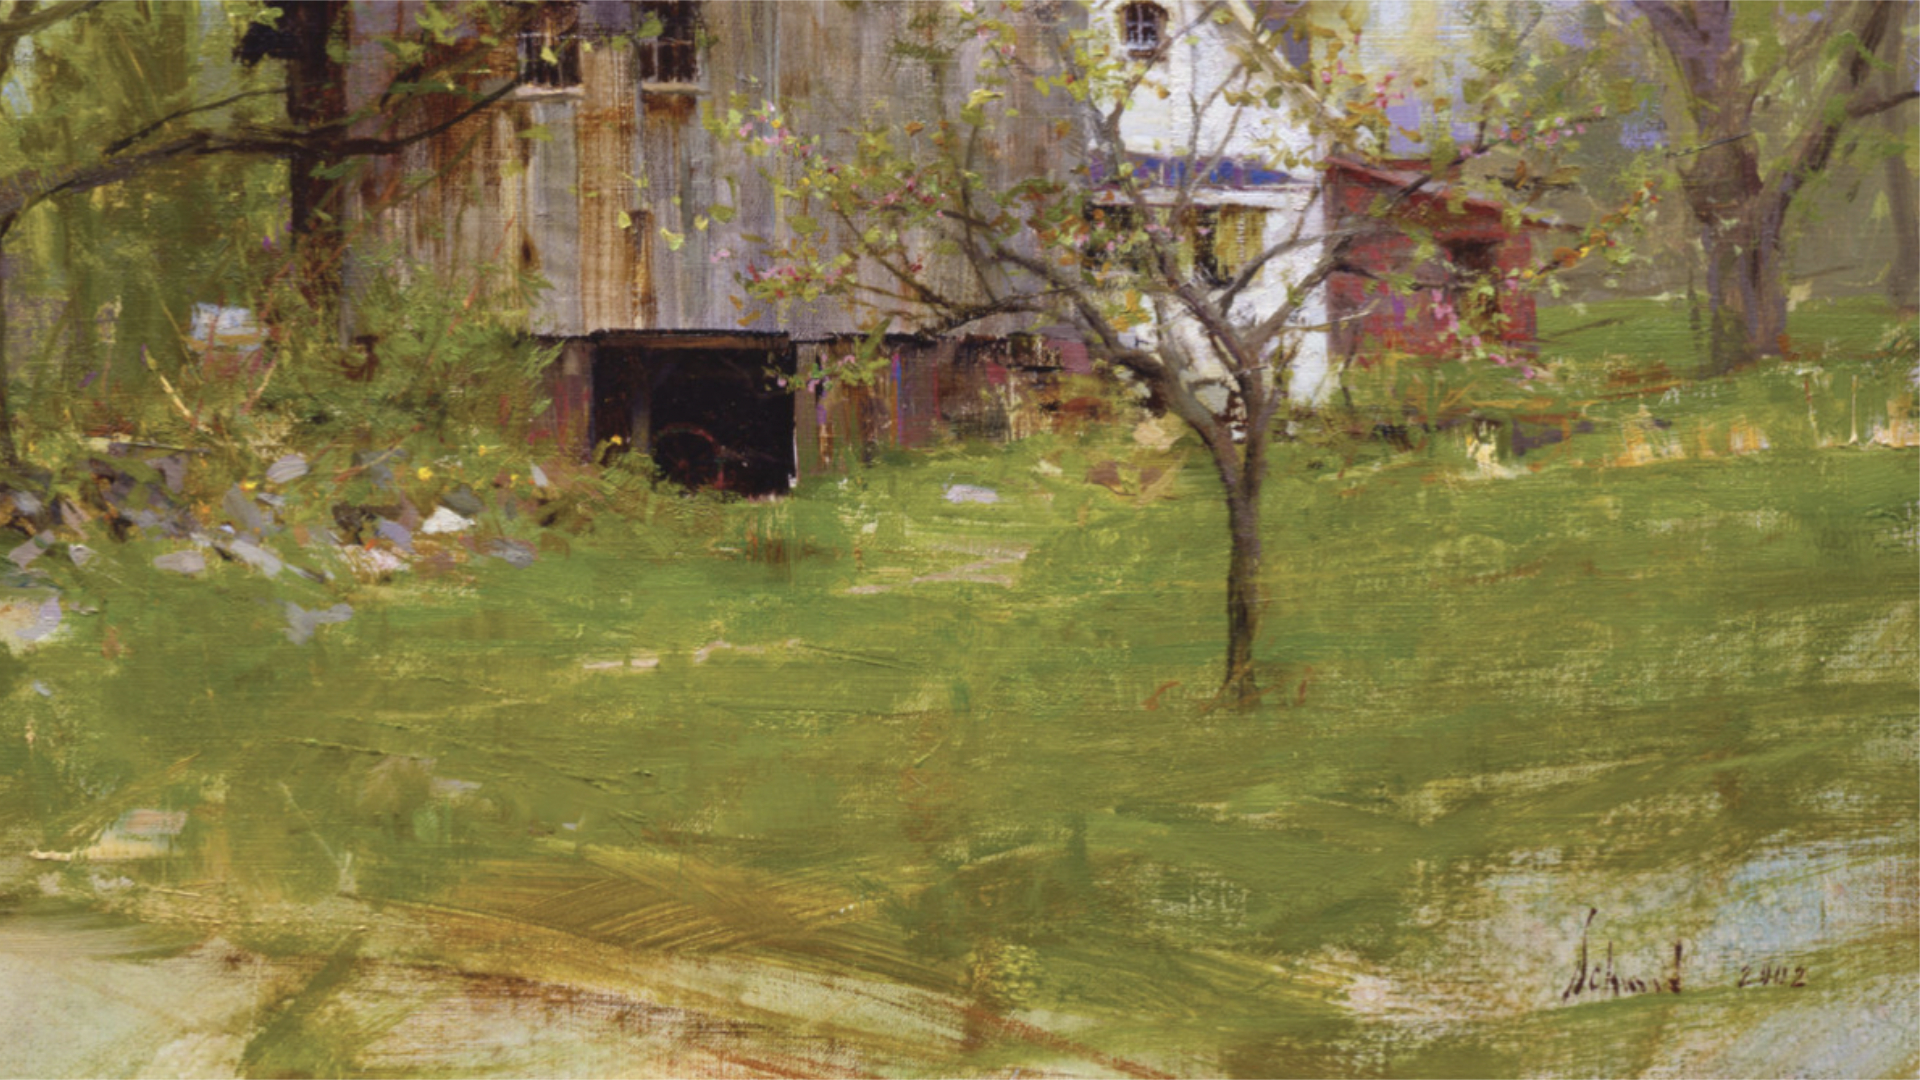 Richard Schmid’s alla prima painting “Apple Blossoms” shows a fragile apple tree in front of a massive barn and adjacent farmhouse.